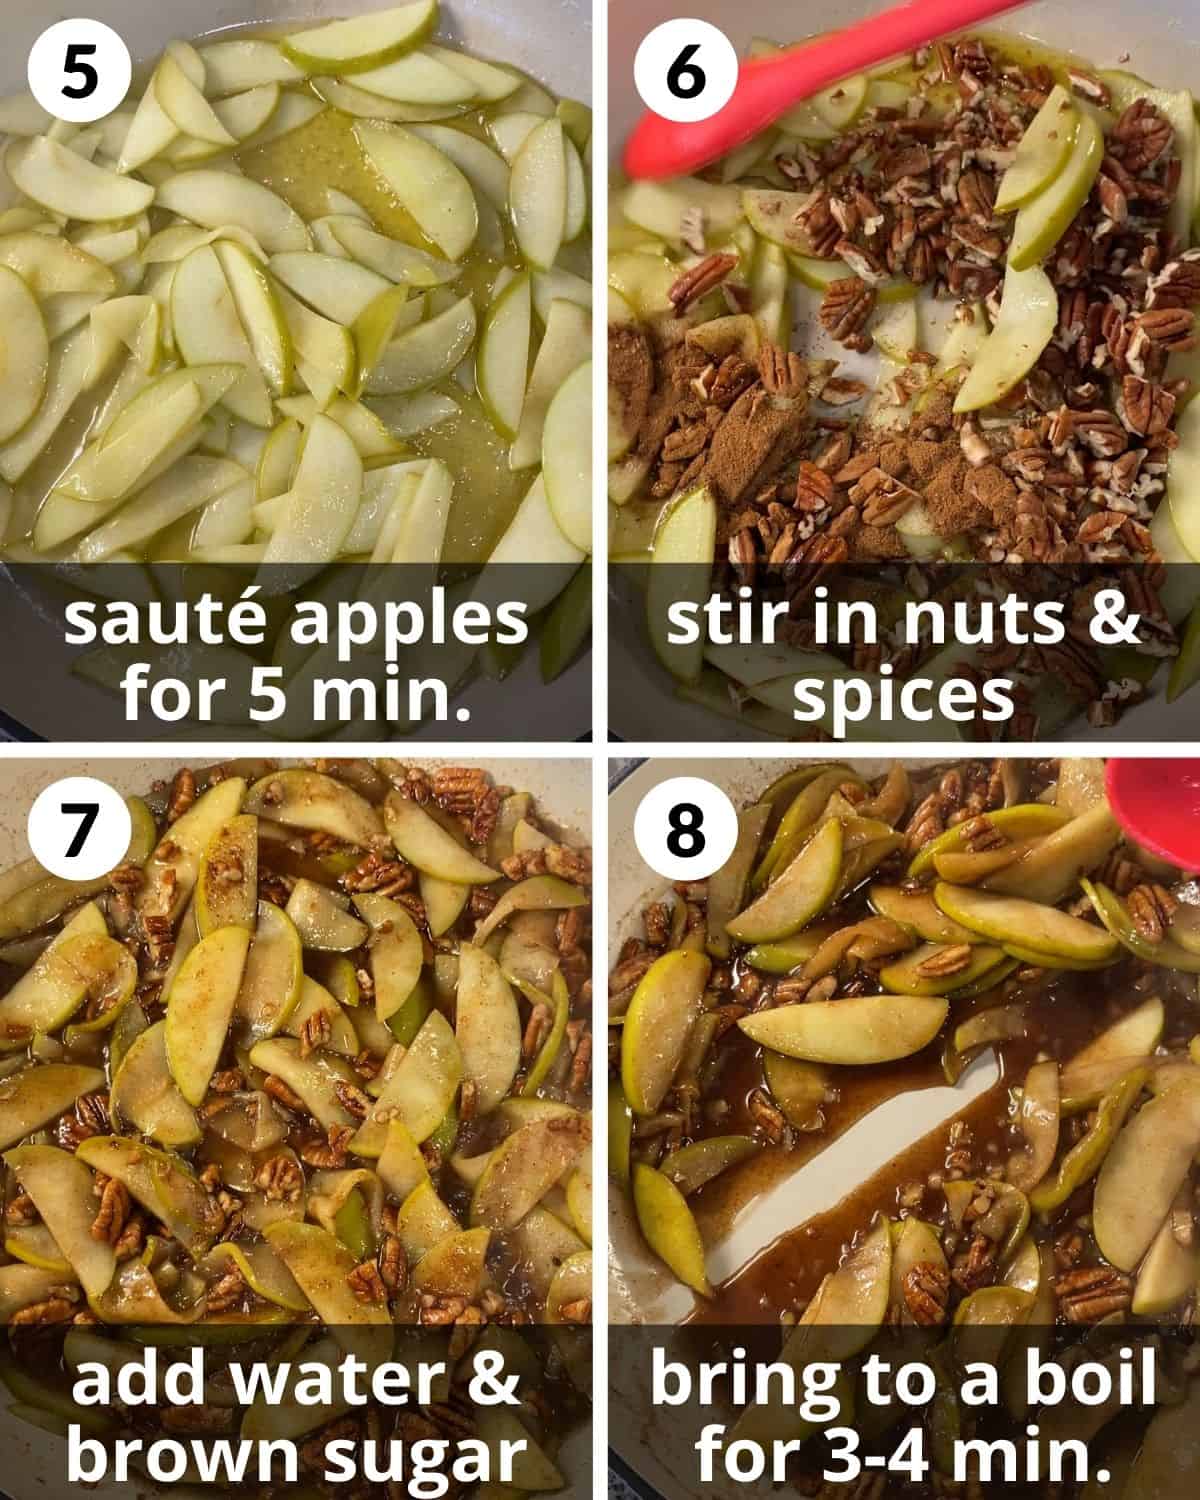 A 4 photo collage showing cooking the apples, nuts, and spices. 